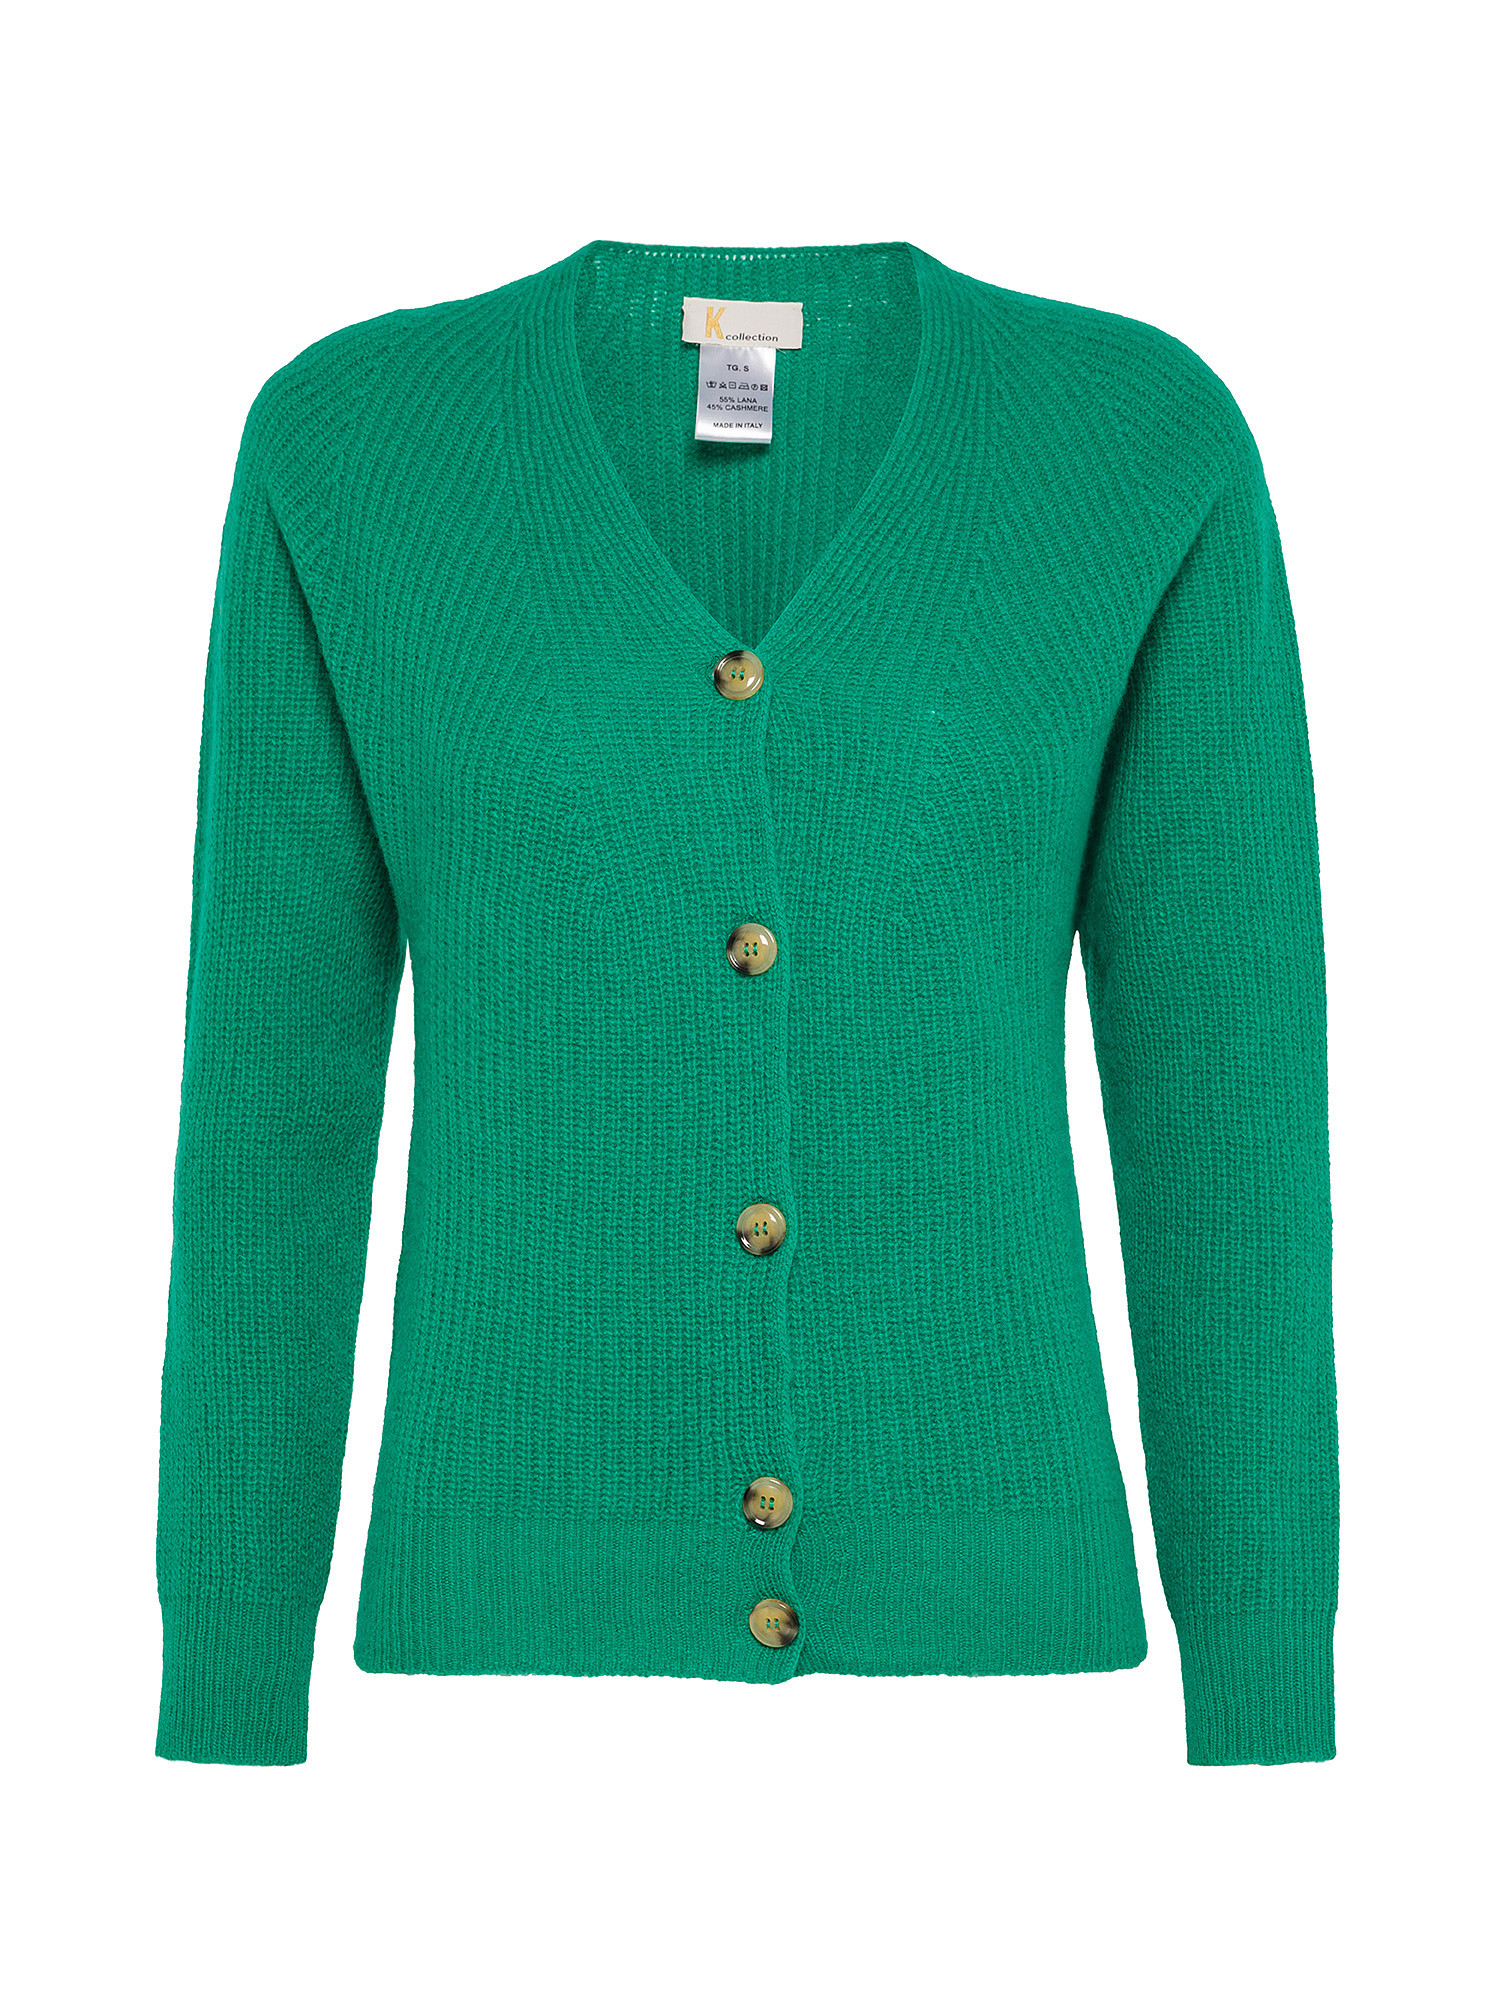 K Collection - Cardigan, Green, large image number 0